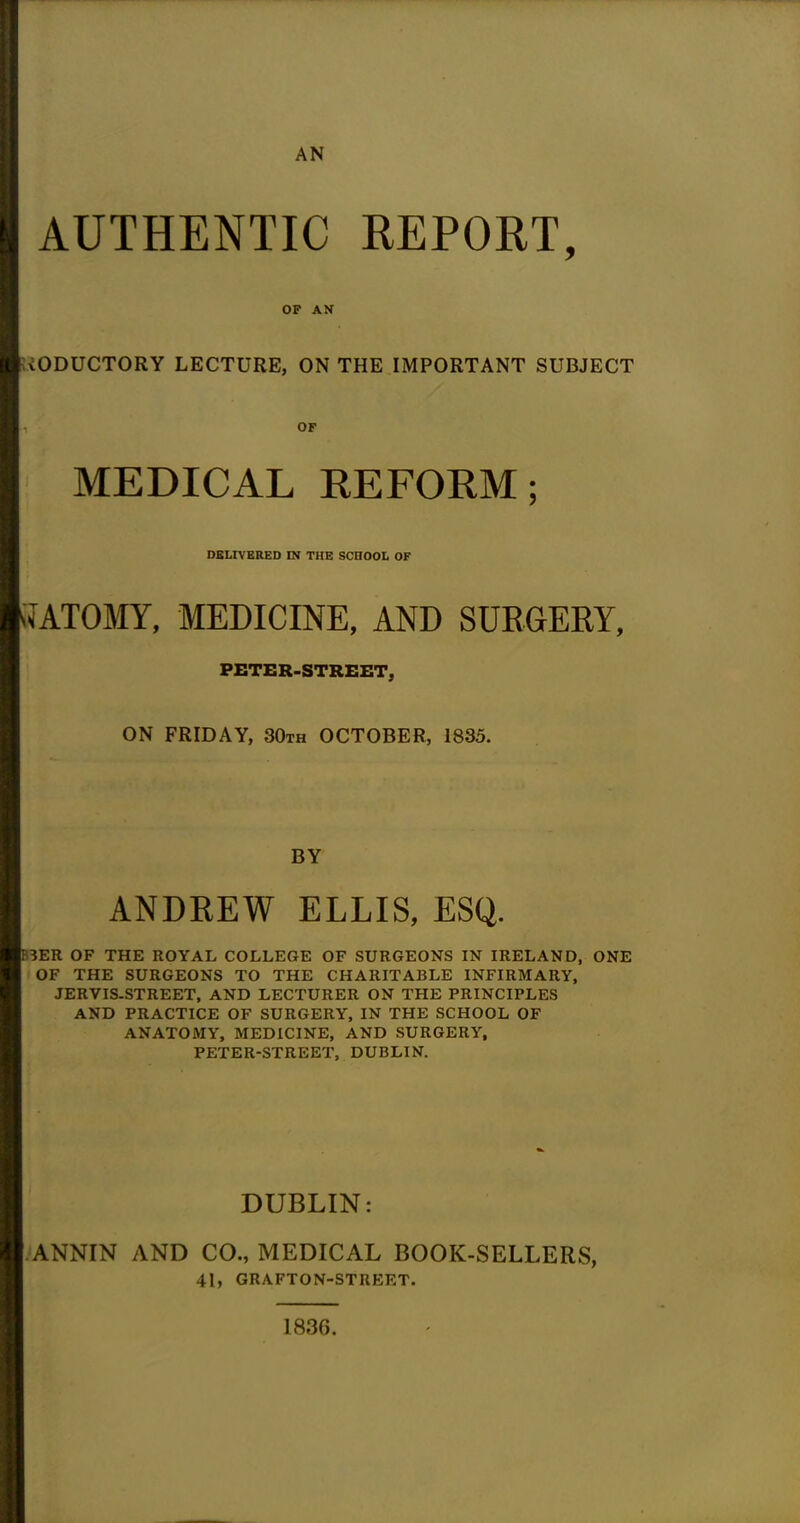 AN AUTHENTIC REPORT, OF AN iODUCTORY LECTURE, ON THE IMPORTANT SUBJECT OF MEDICAL REFORM; DELIVERED IN THE SCHOOL OF < ATOMY, MEDICINE, AND SURGERY, PETER-STREET, ON FRIDAY, 30th OCTOBER, 1835. BY ANDREW ELLIS, ESQ. 3ER OF THE ROYAL COLLEGE OF SURGEONS IN IRELAND, ONE OF THE SURGEONS TO THE CHARITABLE INFIRMARY, JERVIS-STREET, AND LECTURER ON THE PRINCIPLES AND PRACTICE OF SURGERY, IN THE SCHOOL OF ANATOMY, MEDICINE, AND SURGERY, PETER-STREET, DUBLIN. DUBLIN: ANNIN AND CO., MEDICAL BOOK-SELLERS, 41, GRAFTON-STREET. 1836.